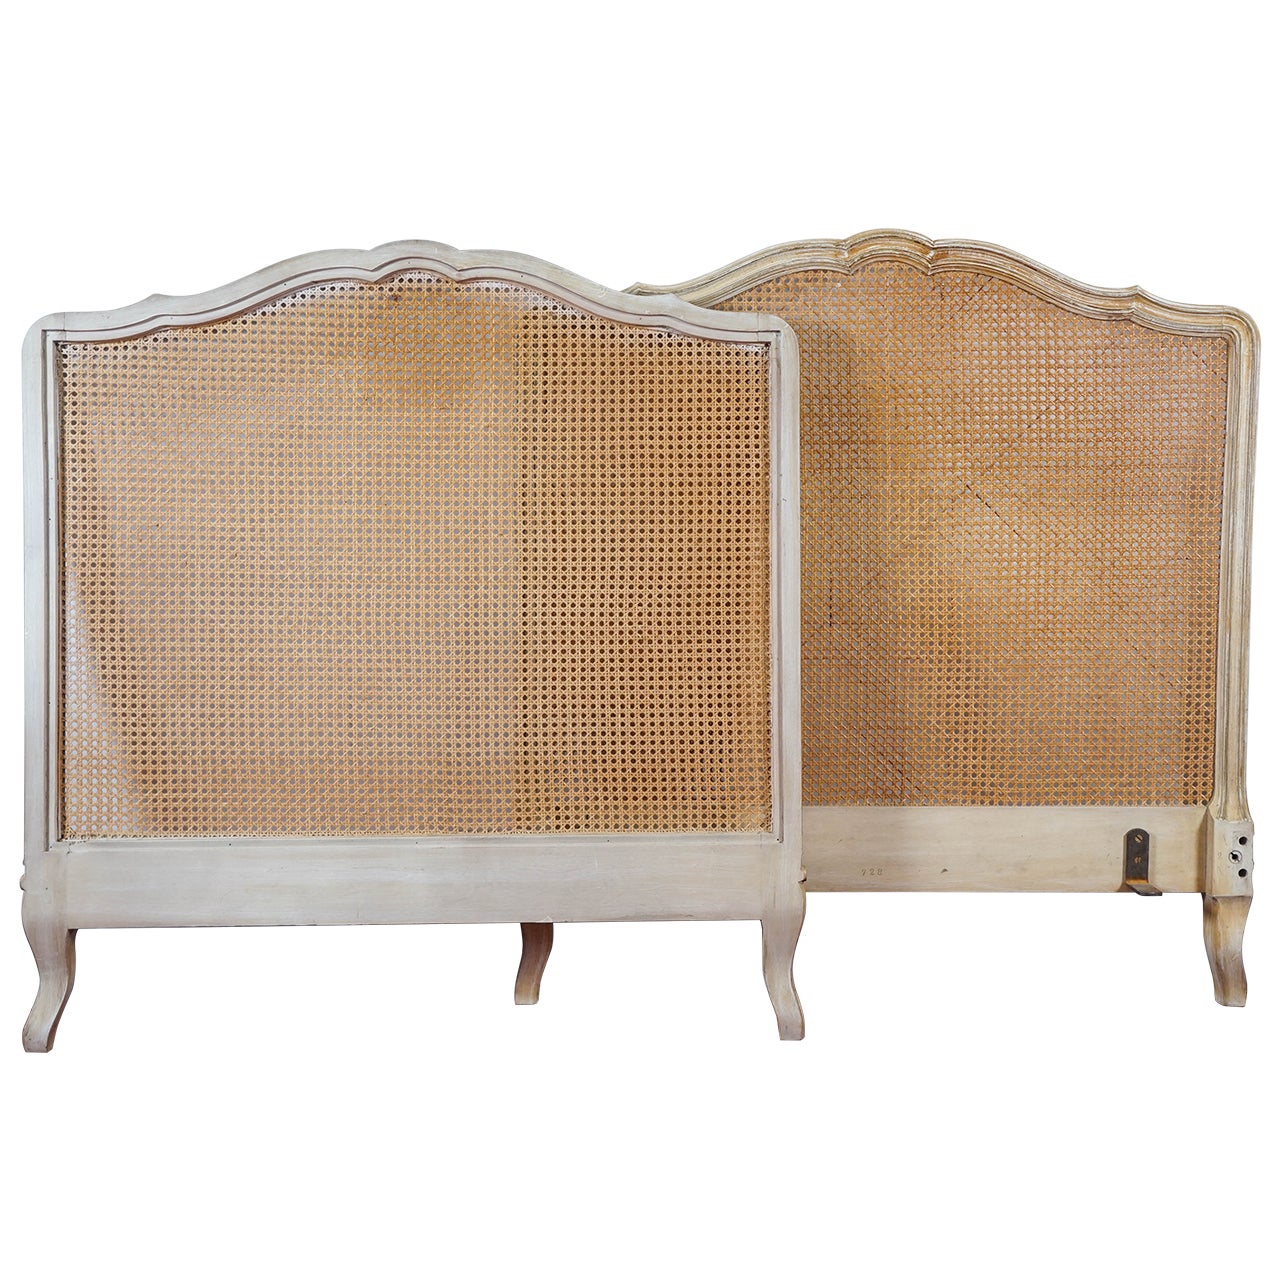 Pair of Vintage French-Style Headboards